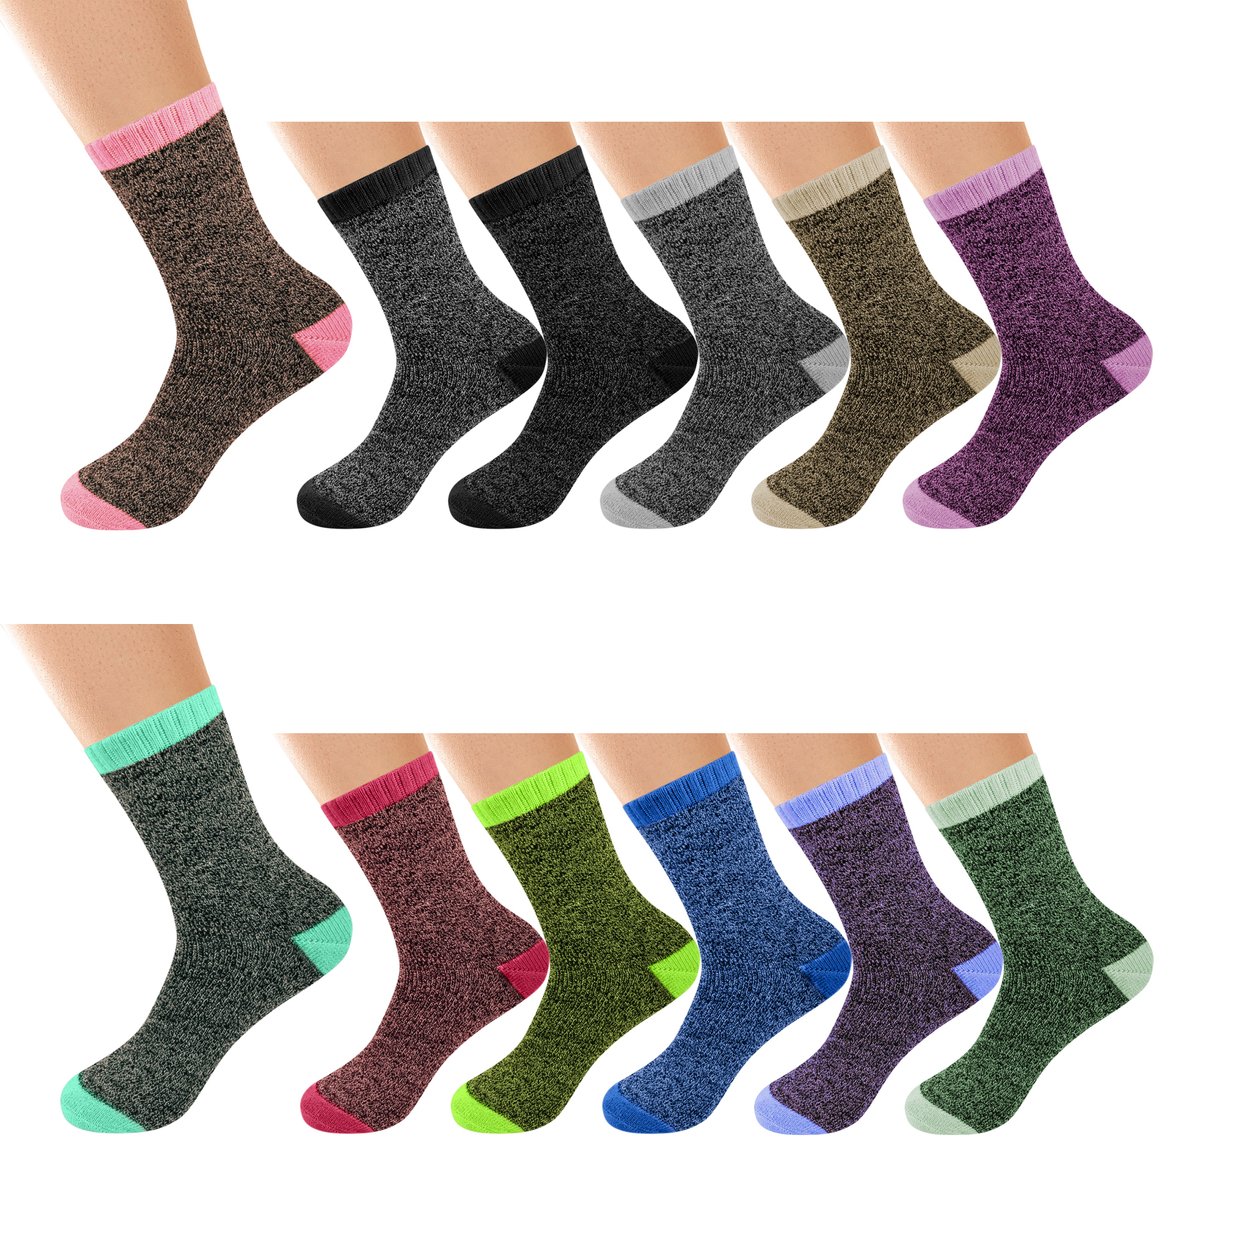 Multi-Pairs: Women's Winter Warm Thick Soft Cozy Thermal Boot Socks - 3-pack